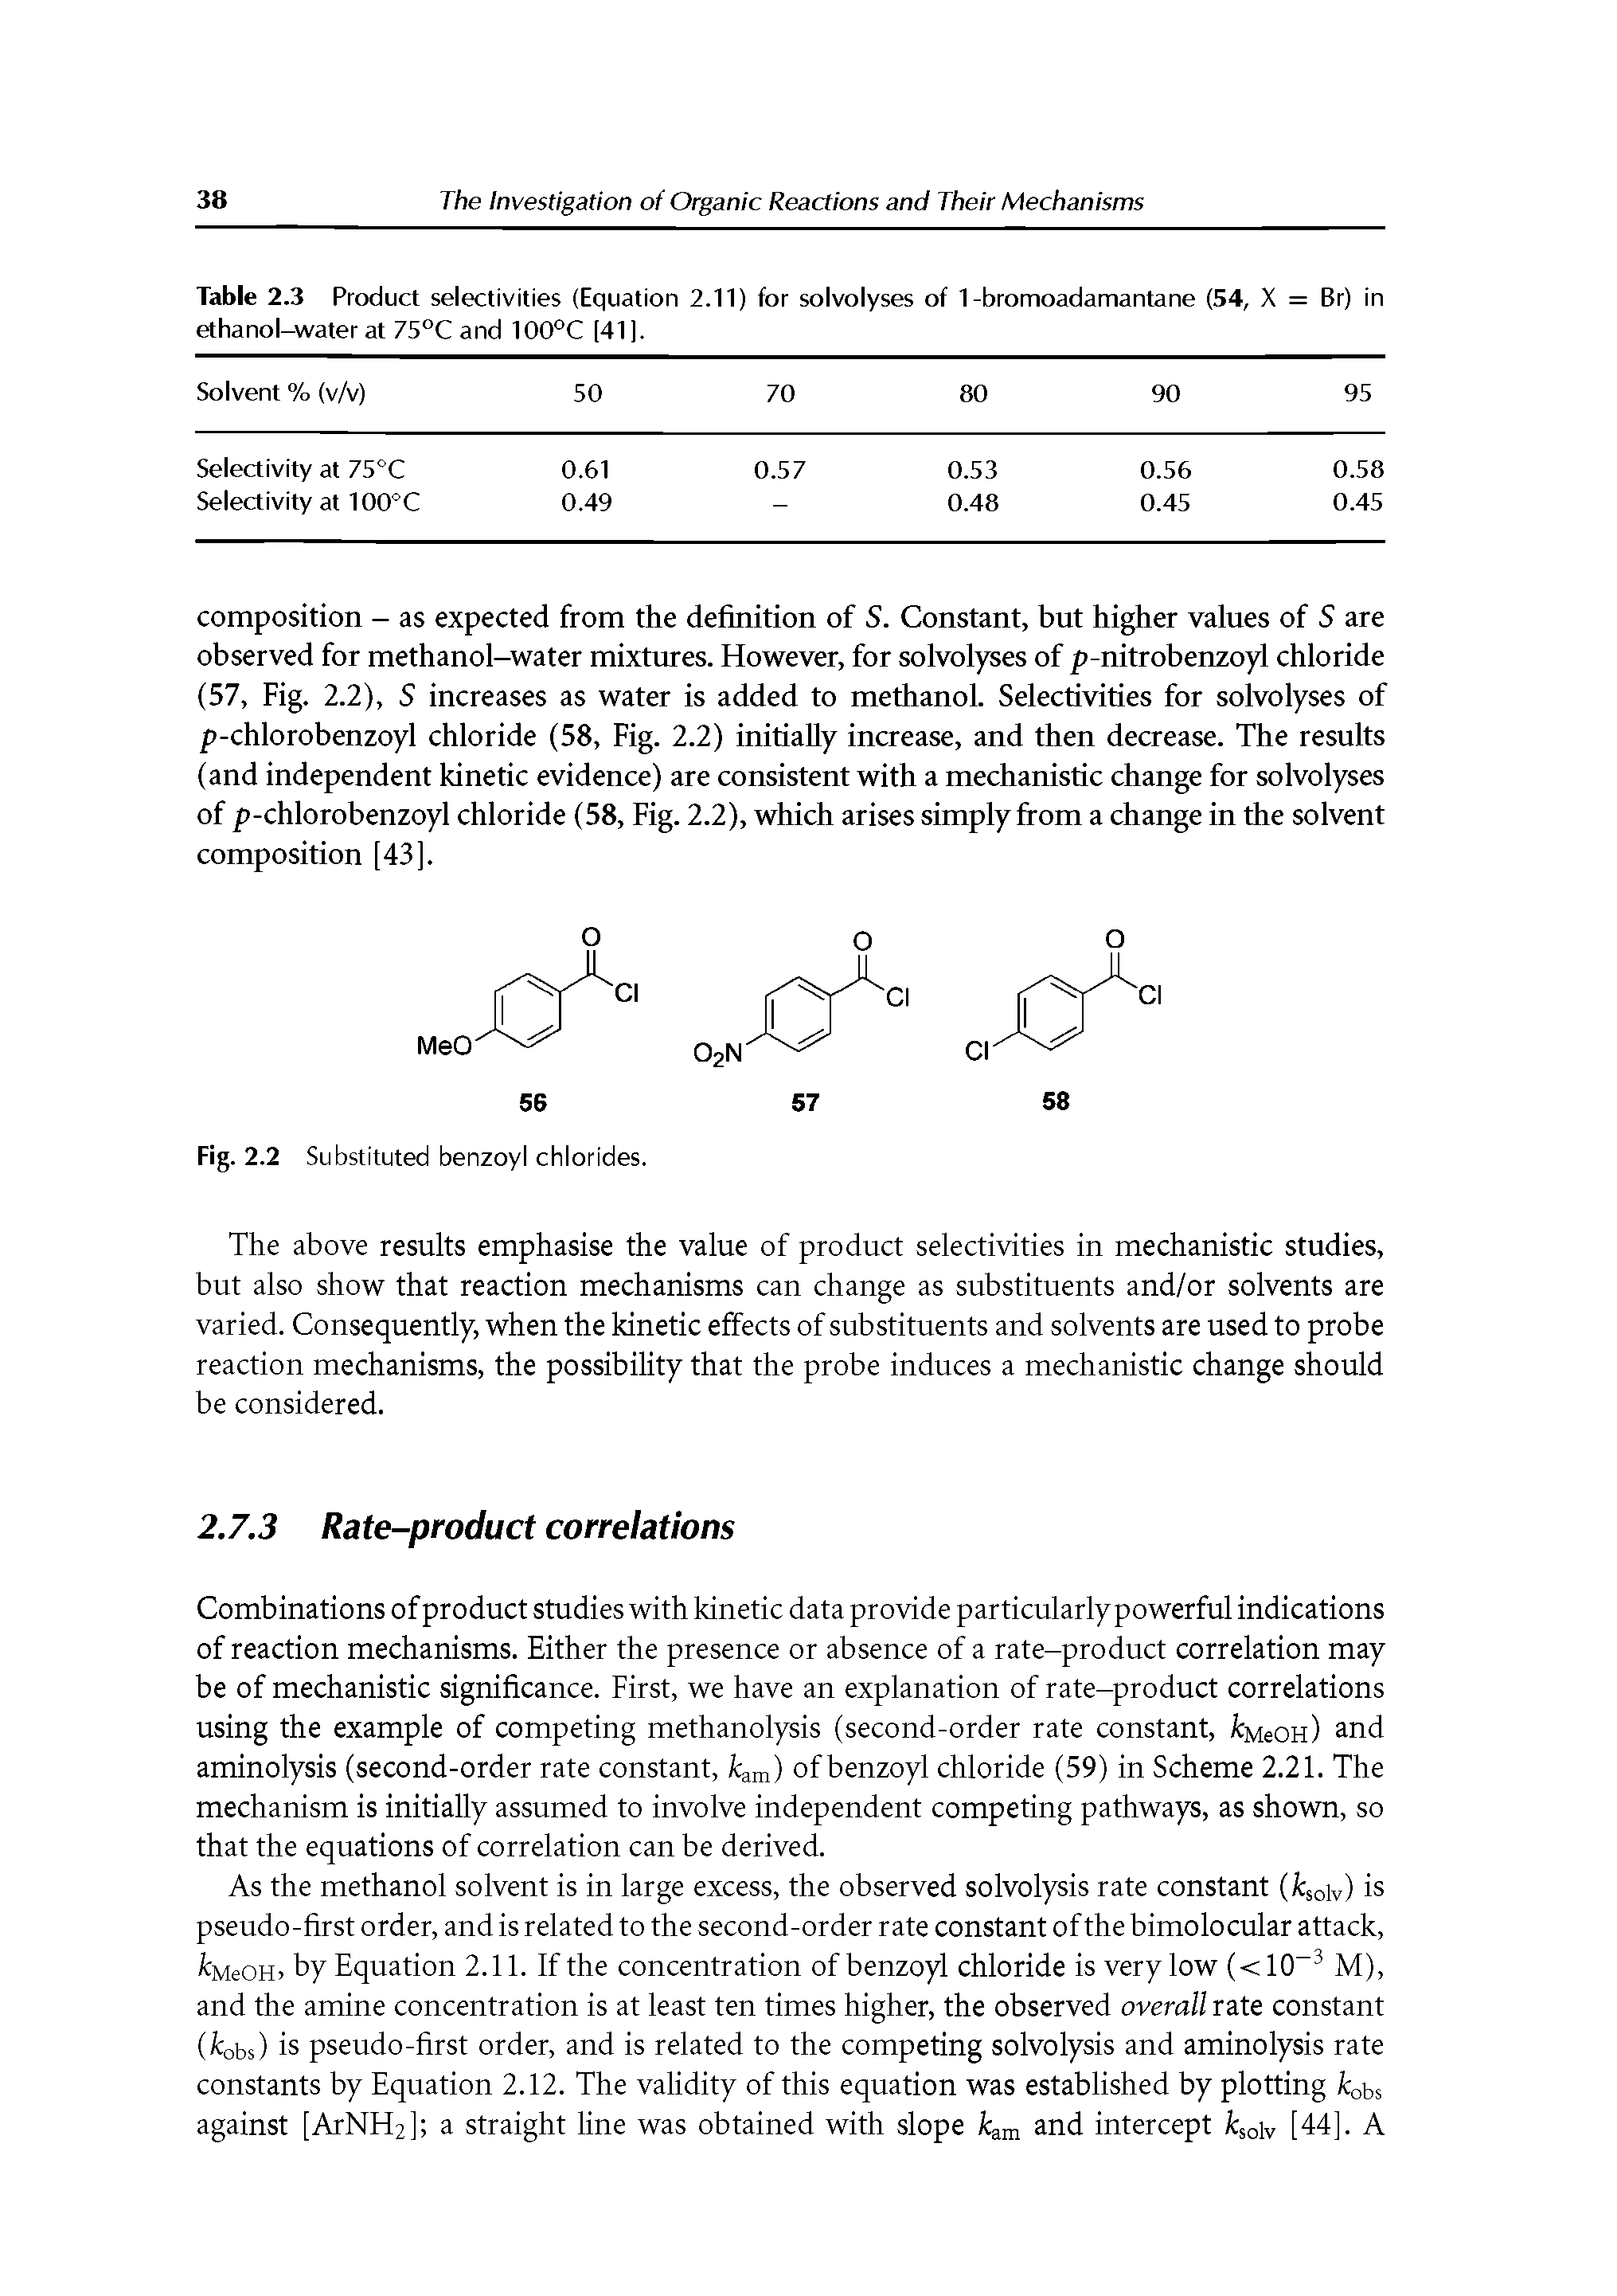 Table 2.3 Product selectivities (Equation 2.11) for solvolyses of 1-bromoadamantane (54, X = ethanol-water at 75°C and 100°C [41 ]. Br) in...